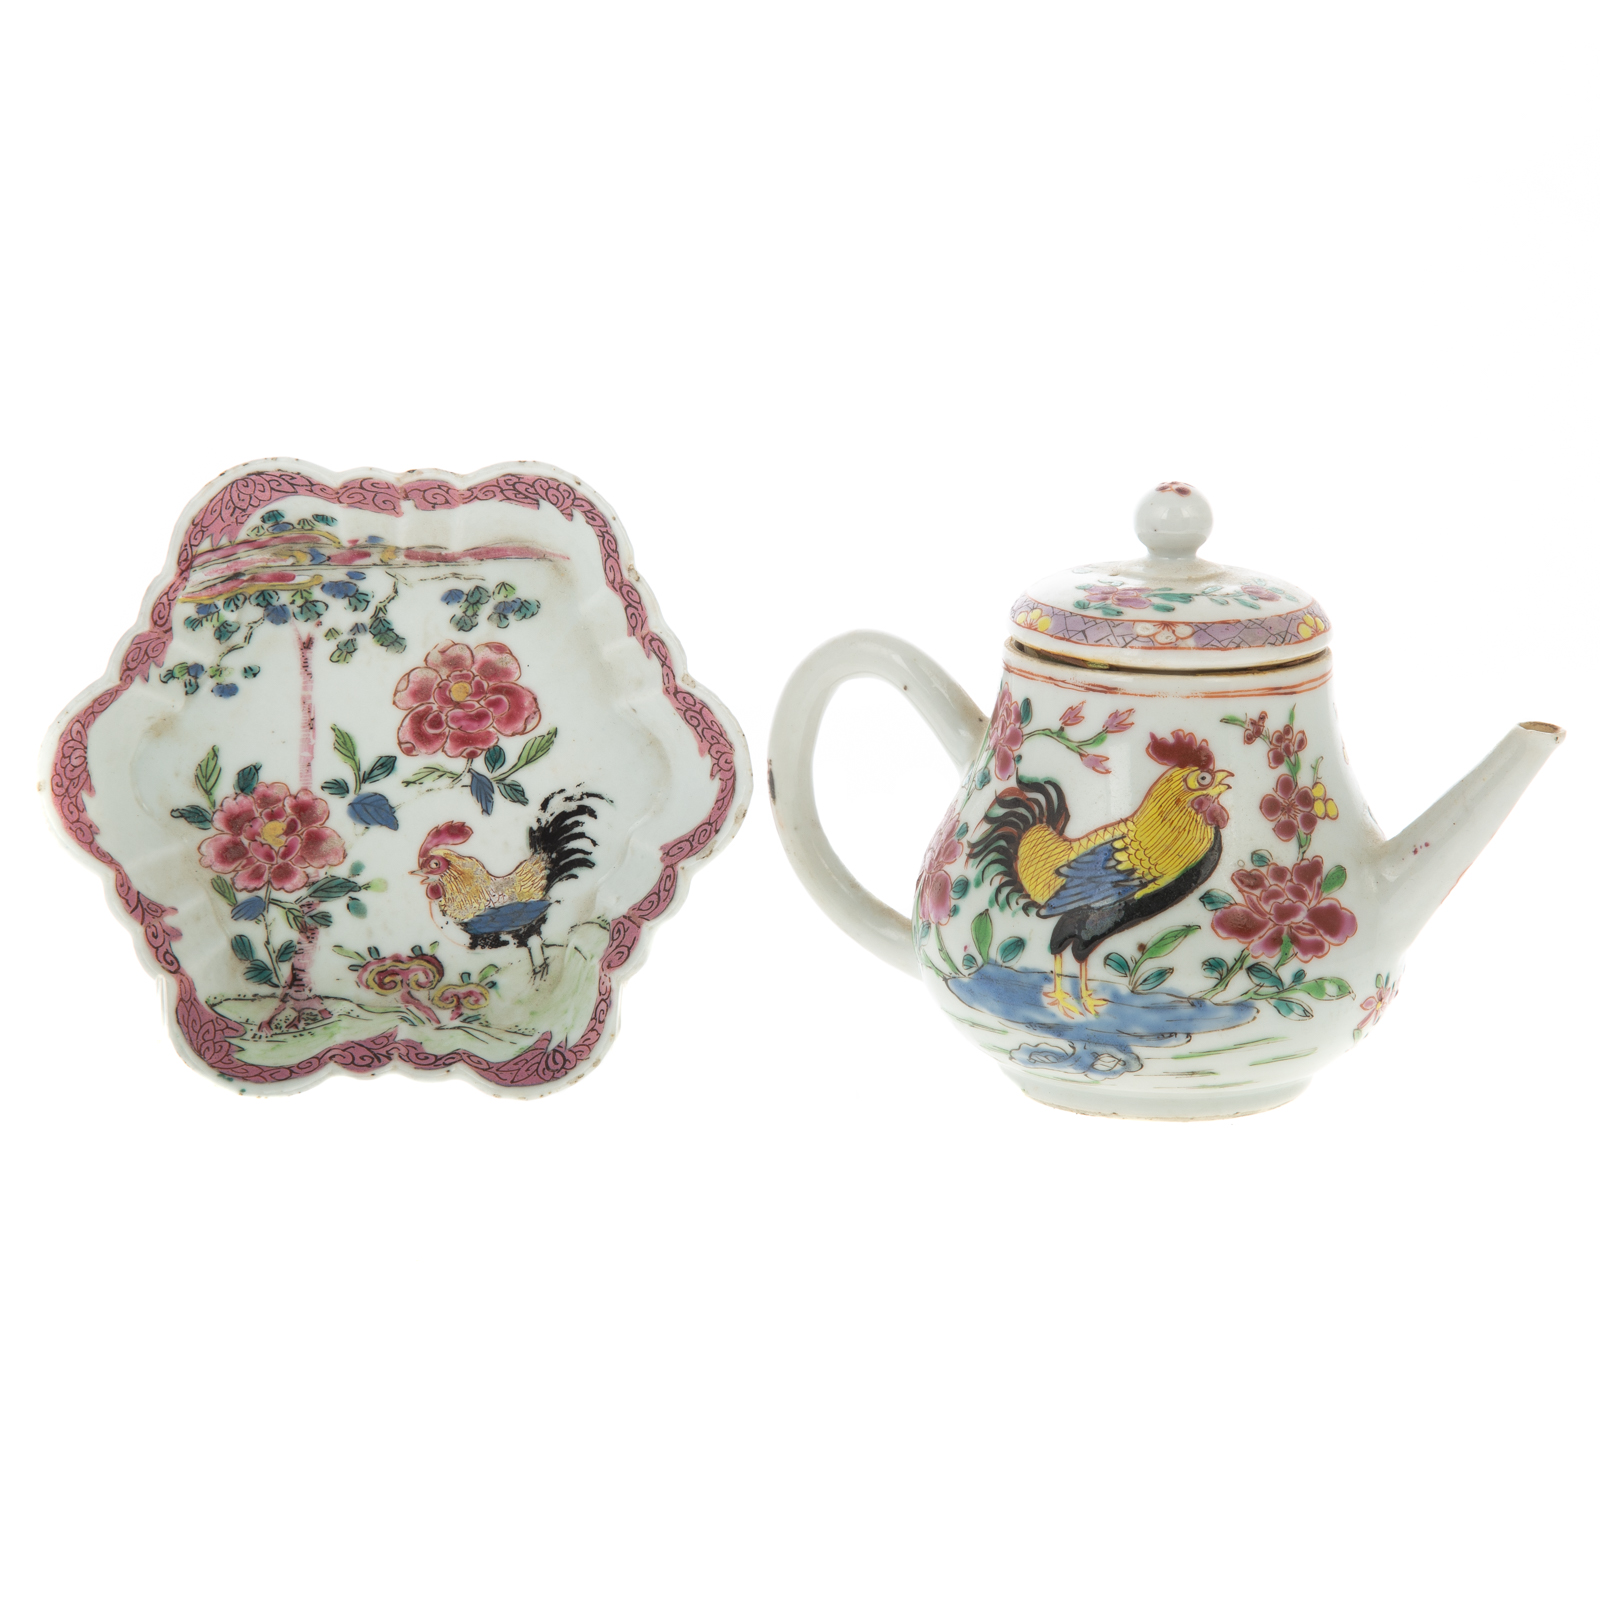 CHINESE EXPORT FAMILLE ROSE TEAPOT 2ea1b3